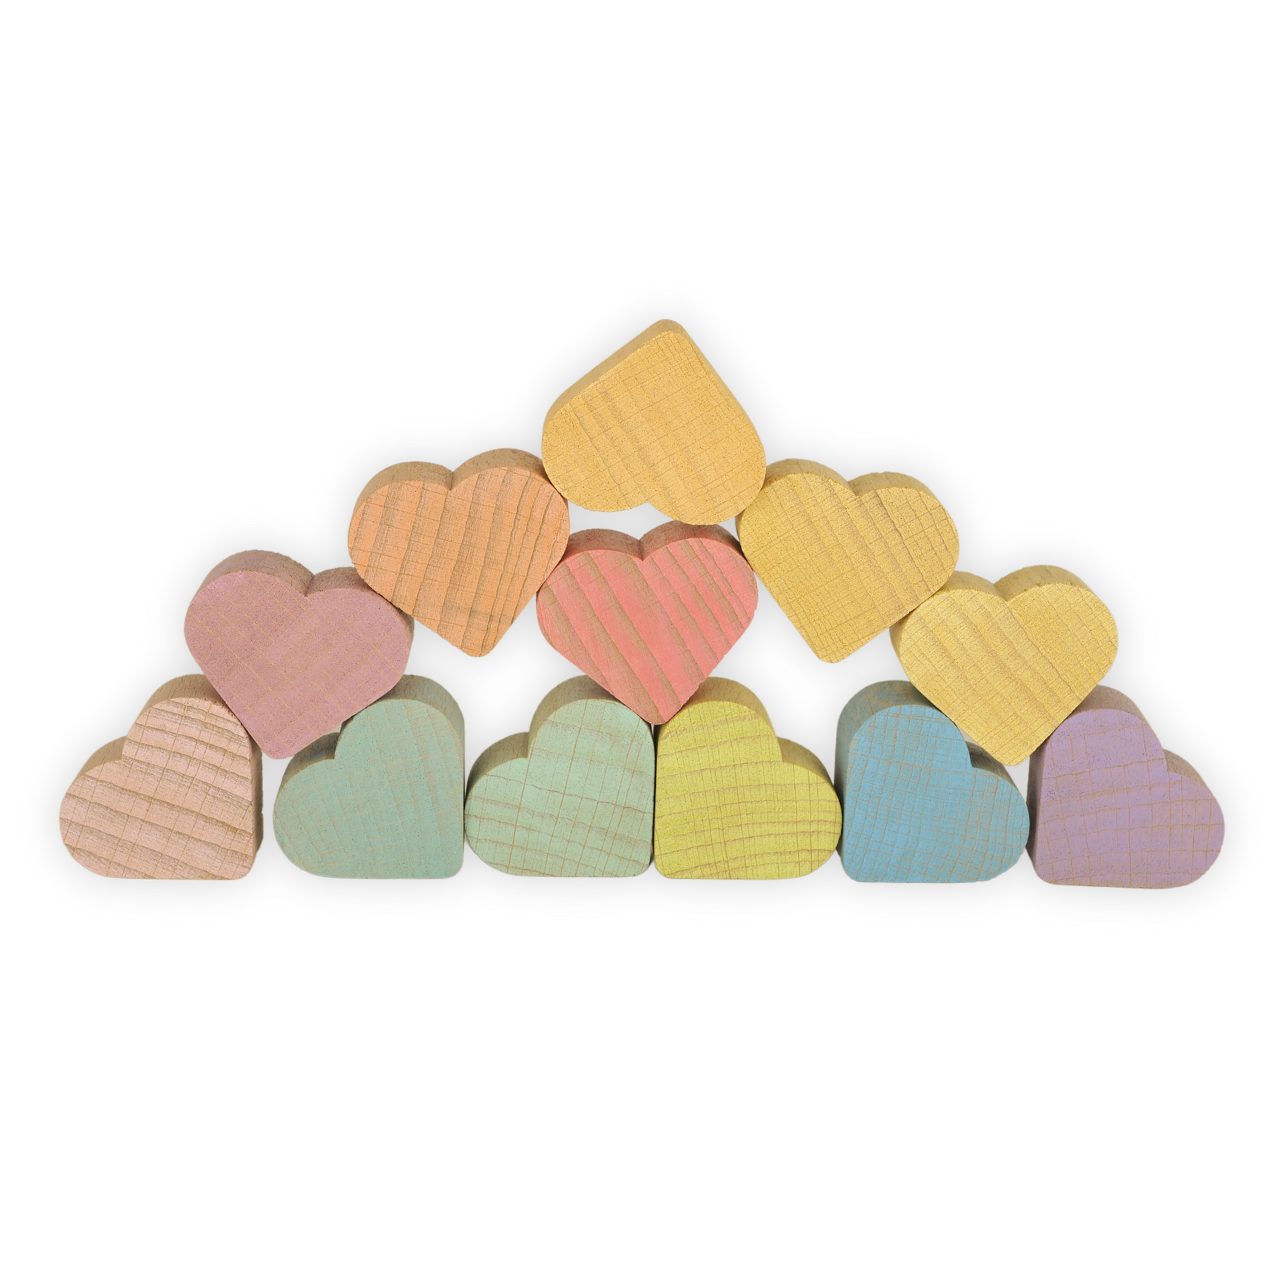 Wooden Heart (Available in 3 colors)